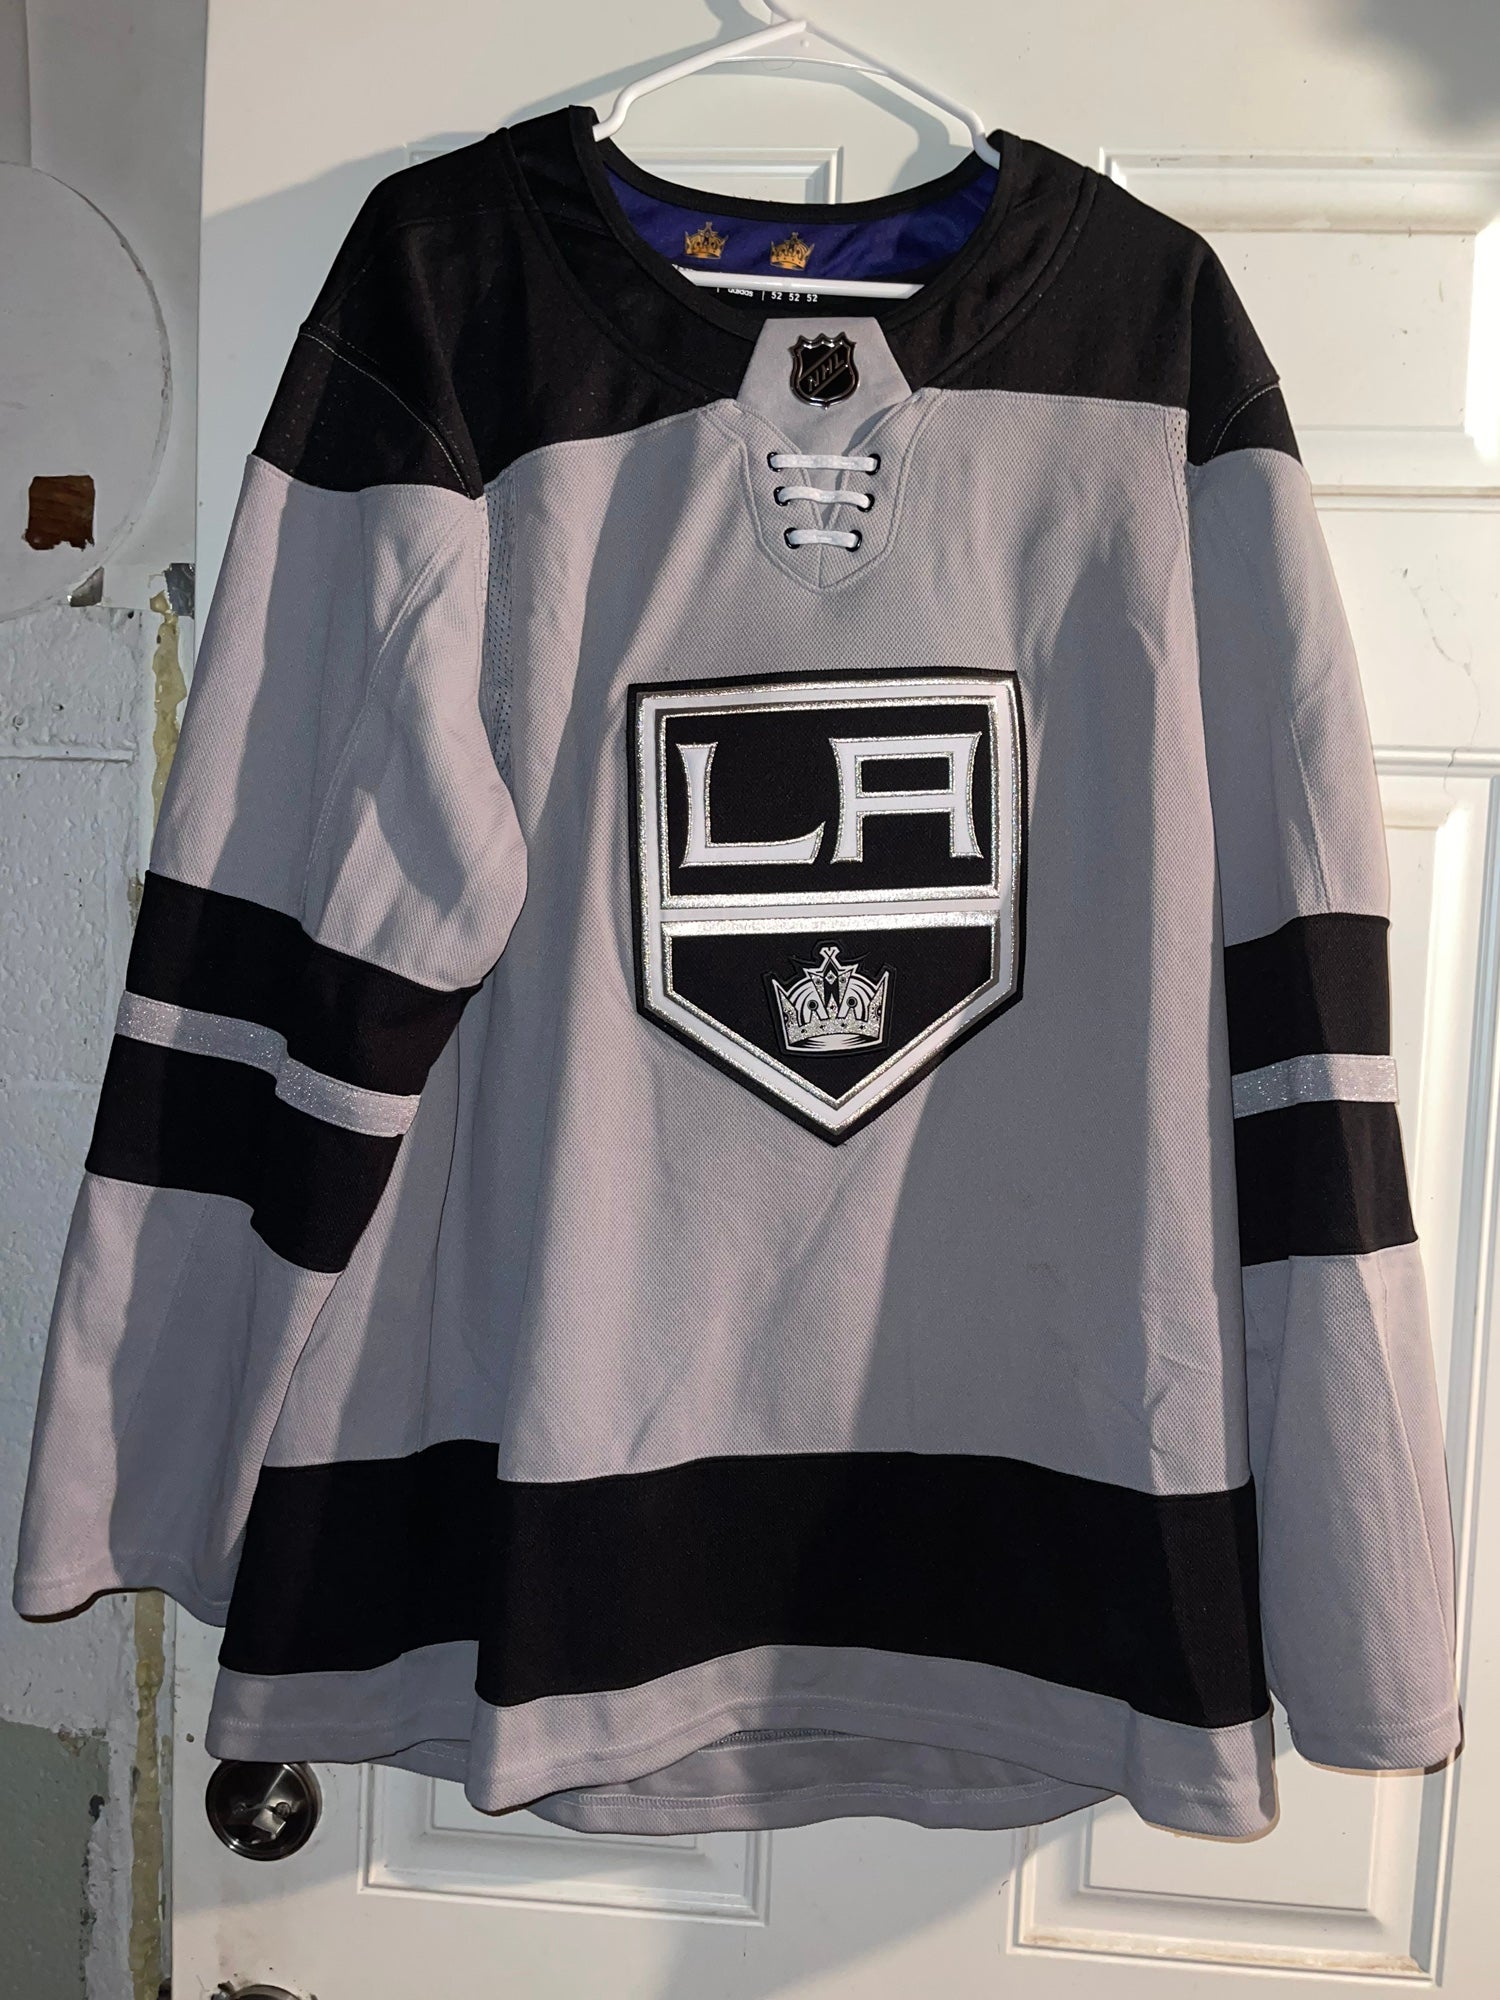 Adidas Climalite NHL Los Angeles Kings Authentic Third Jersey Mens